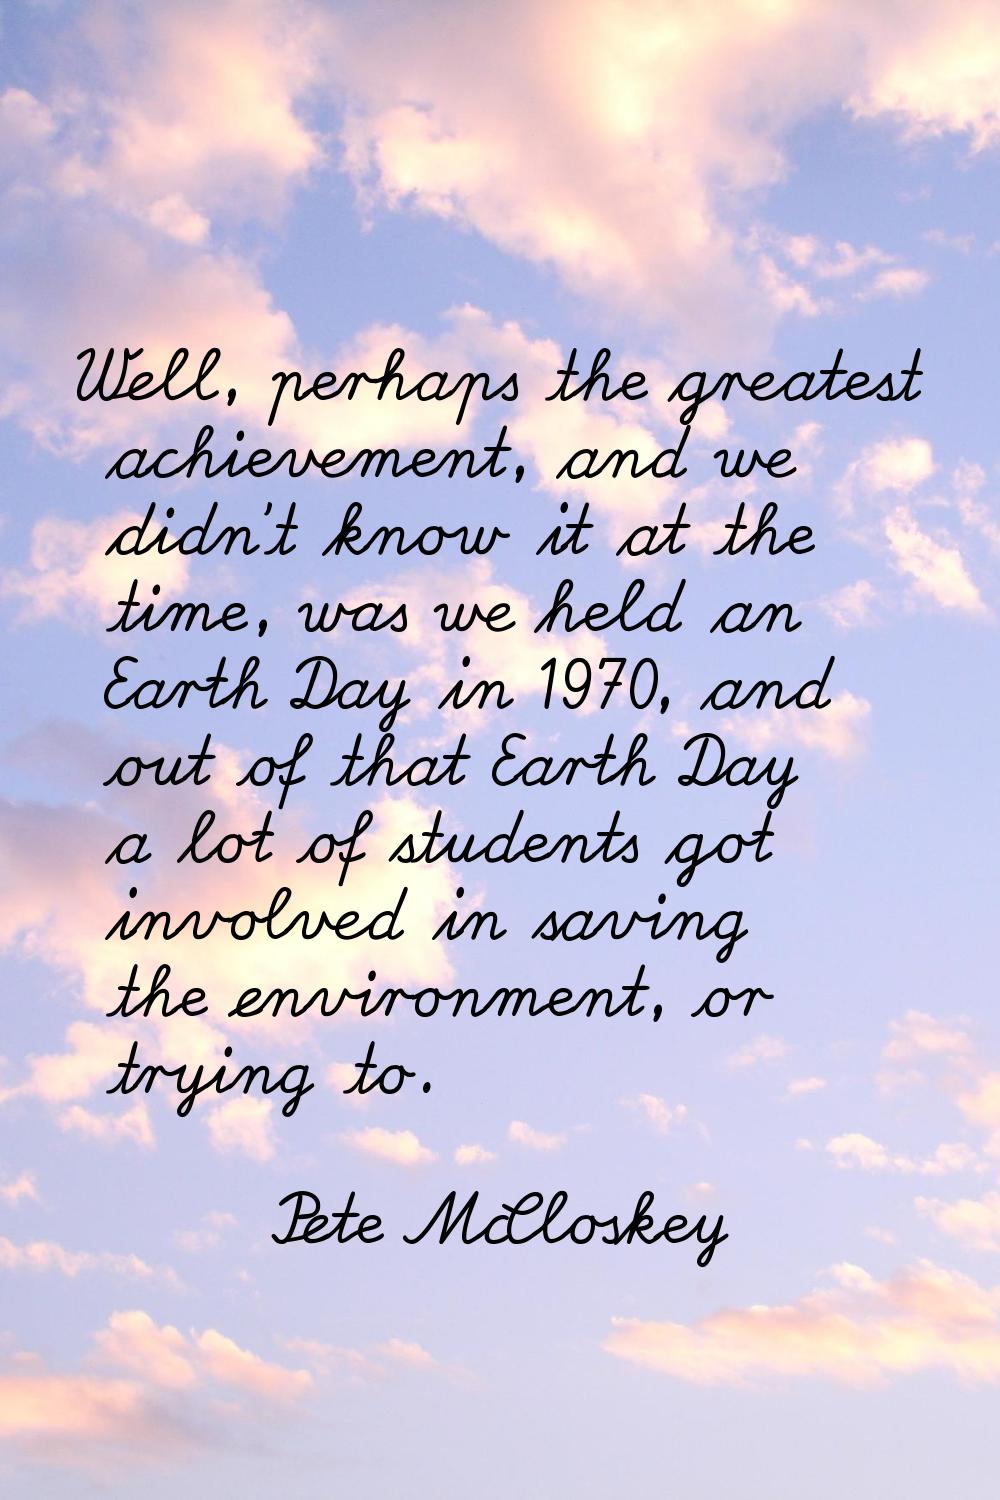 Well, perhaps the greatest achievement, and we didn't know it at the time, was we held an Earth Day